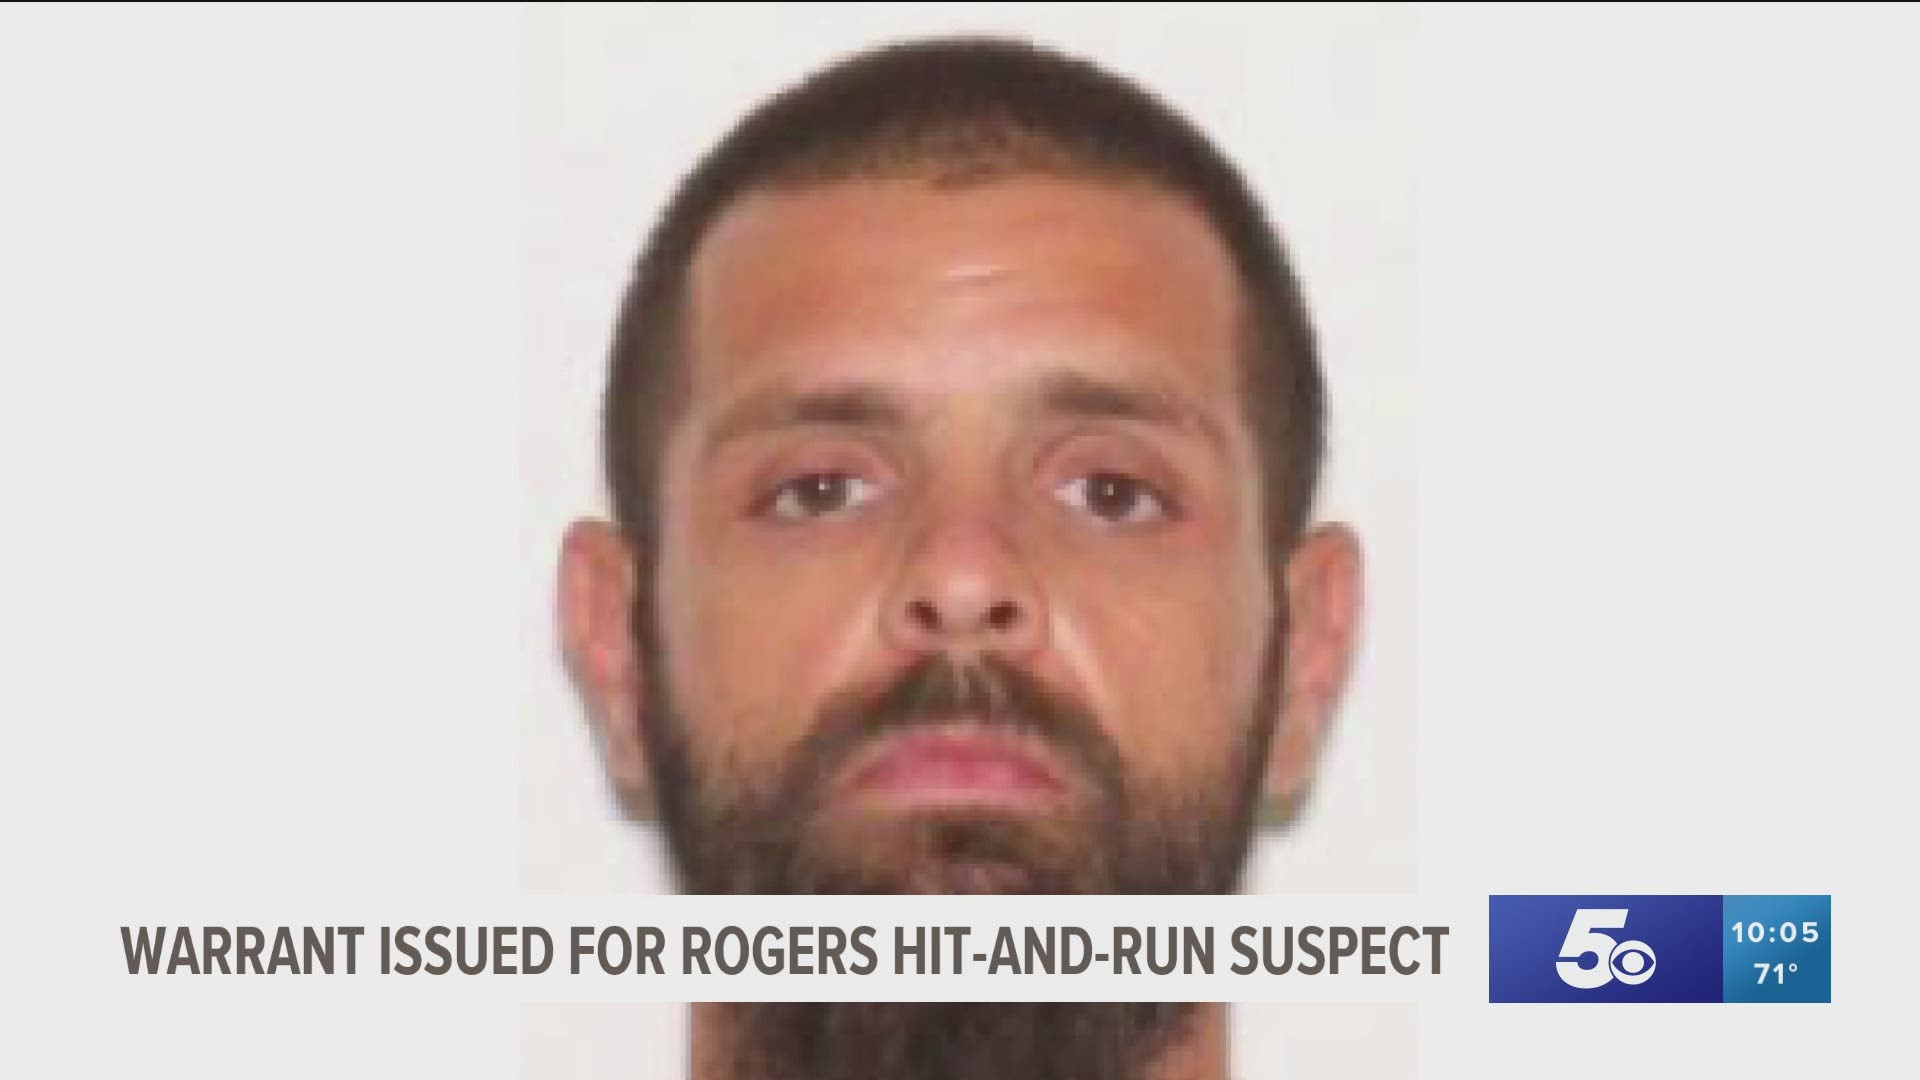 A Felony Warrant has been issued for Christopher Park, 37 of Rogers, in connection with Saturday’s fatal hit-and-run accident. https://bit.ly/34RDq5T